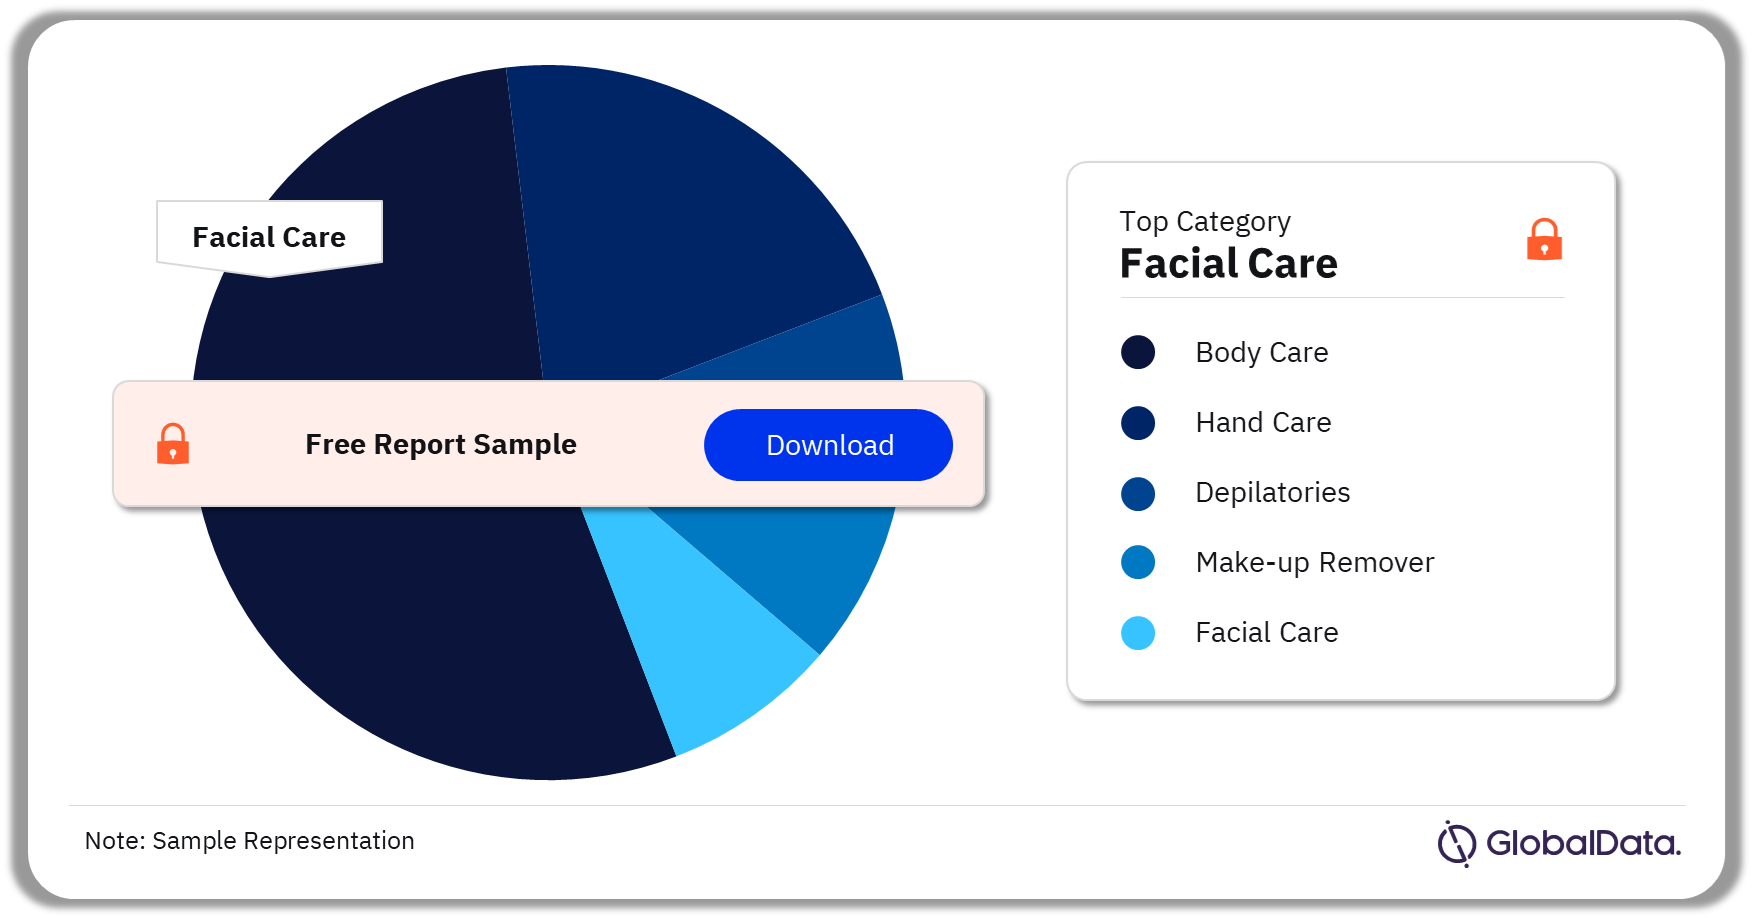 Western Europe Skincare Market Analysis by Categories